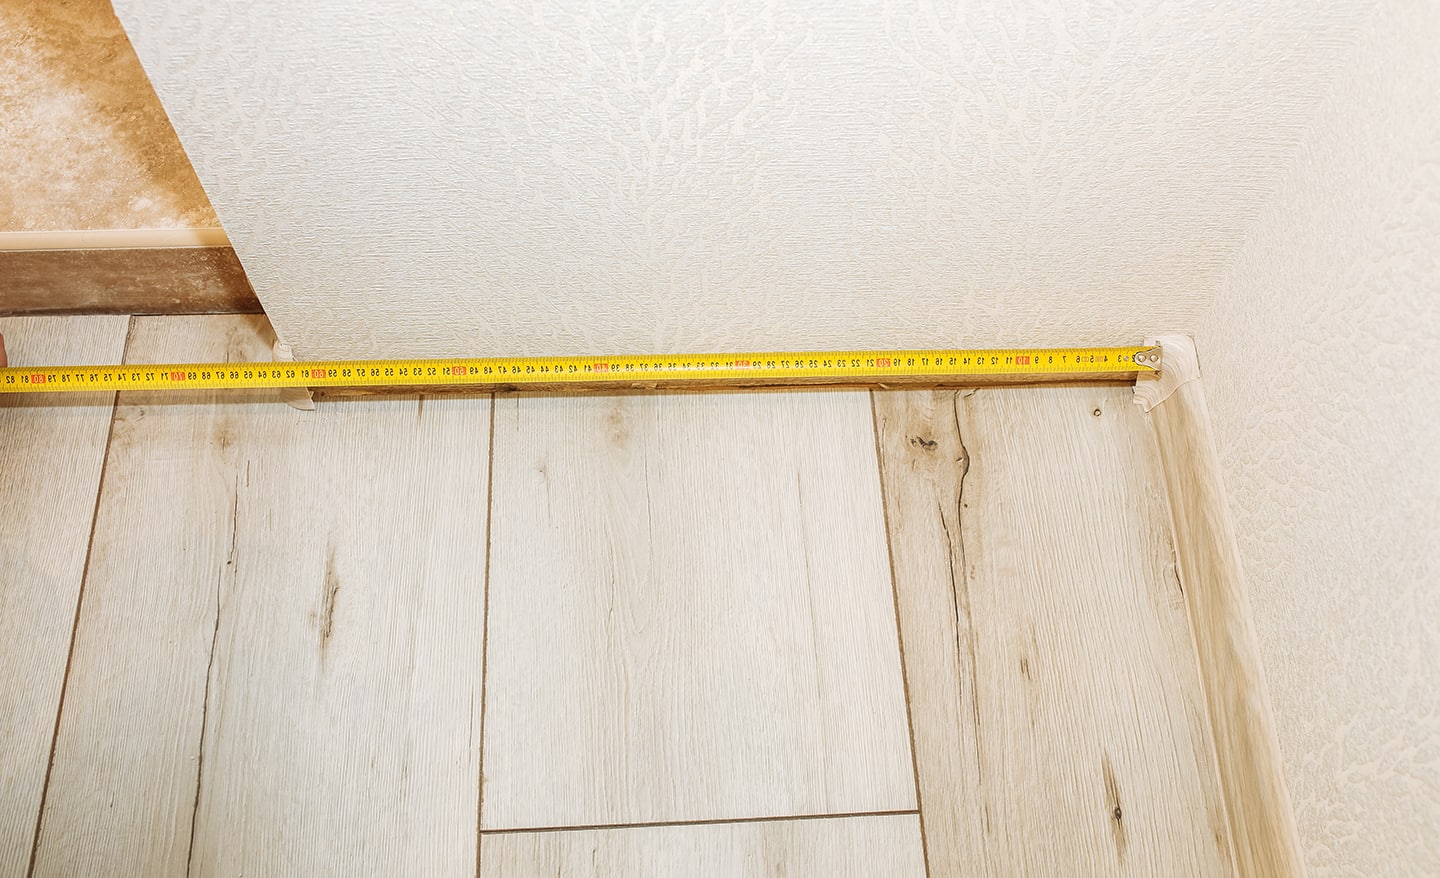 Someone measuring a corner of a room.